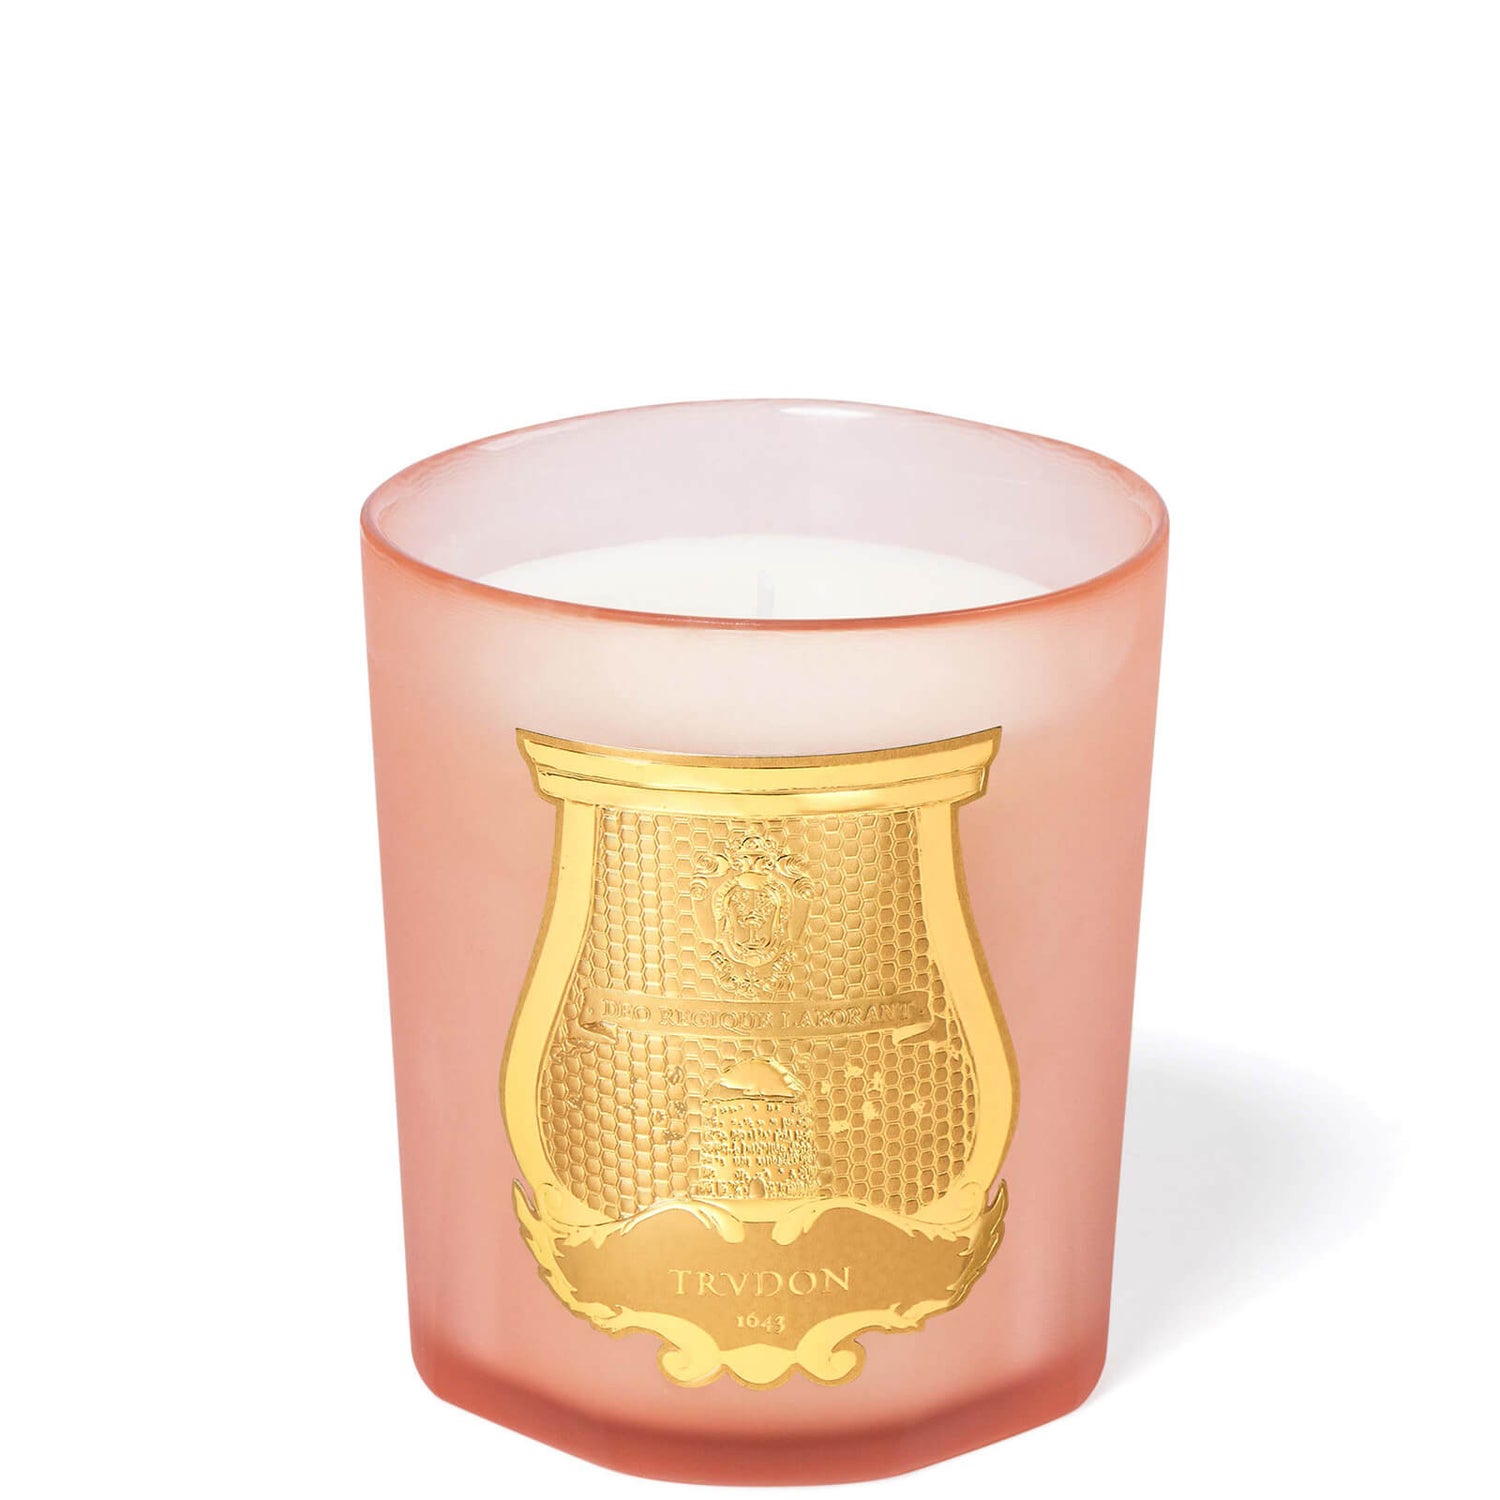 TRUDON Scented Candle 270g - Tuileries | Cult Beauty